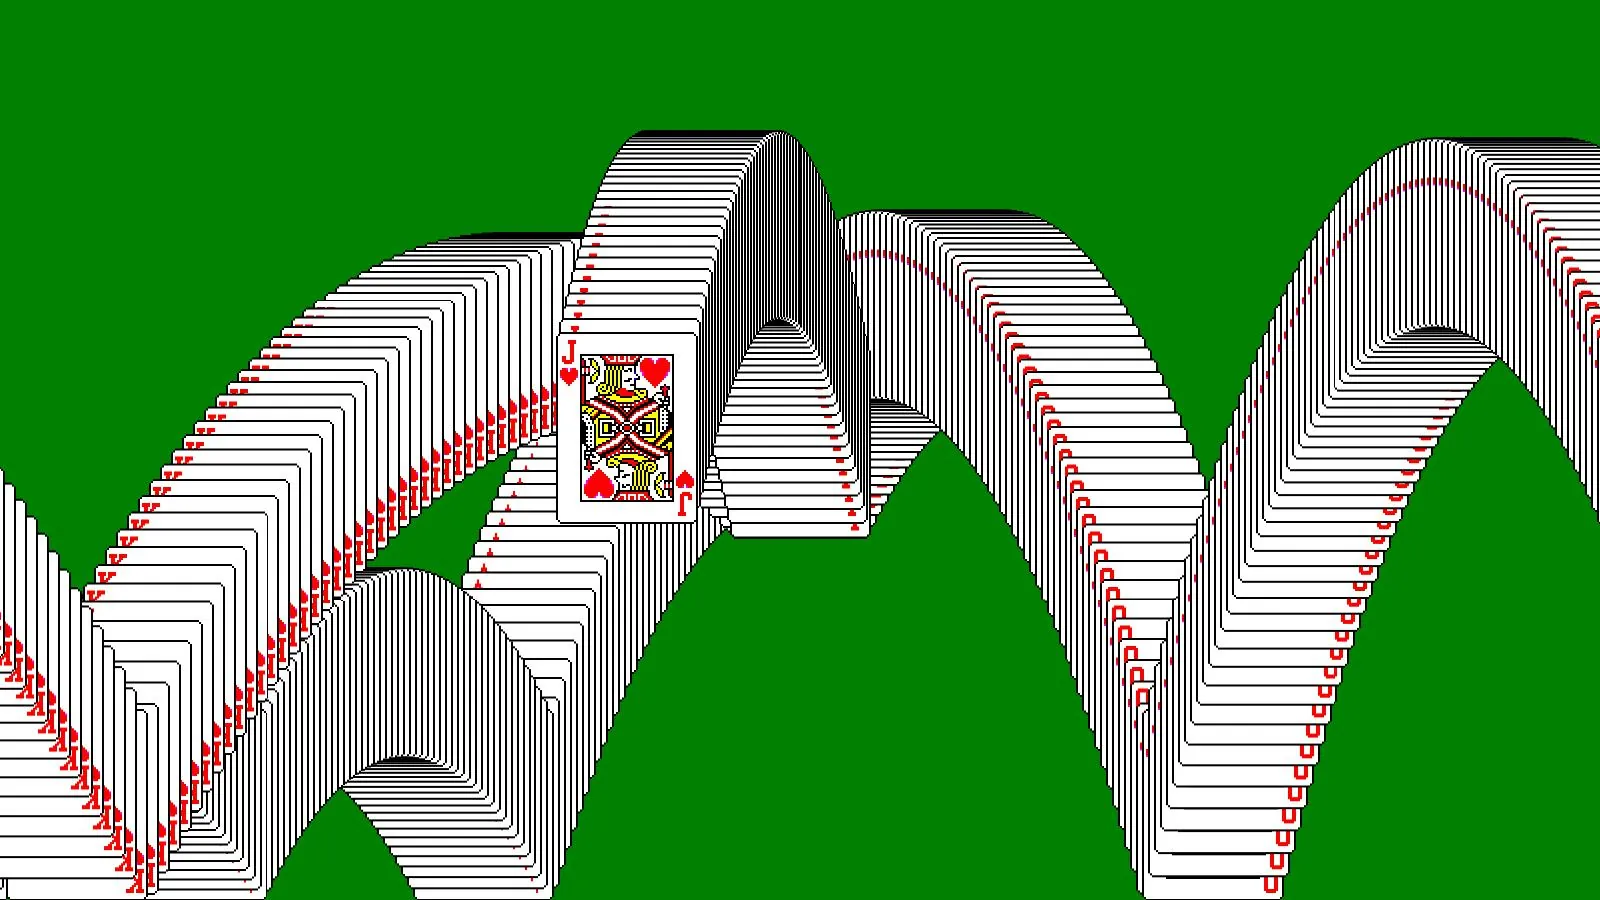 Single frame of the solitaire win animation with cards flying off in all directions leaving behind a trail.